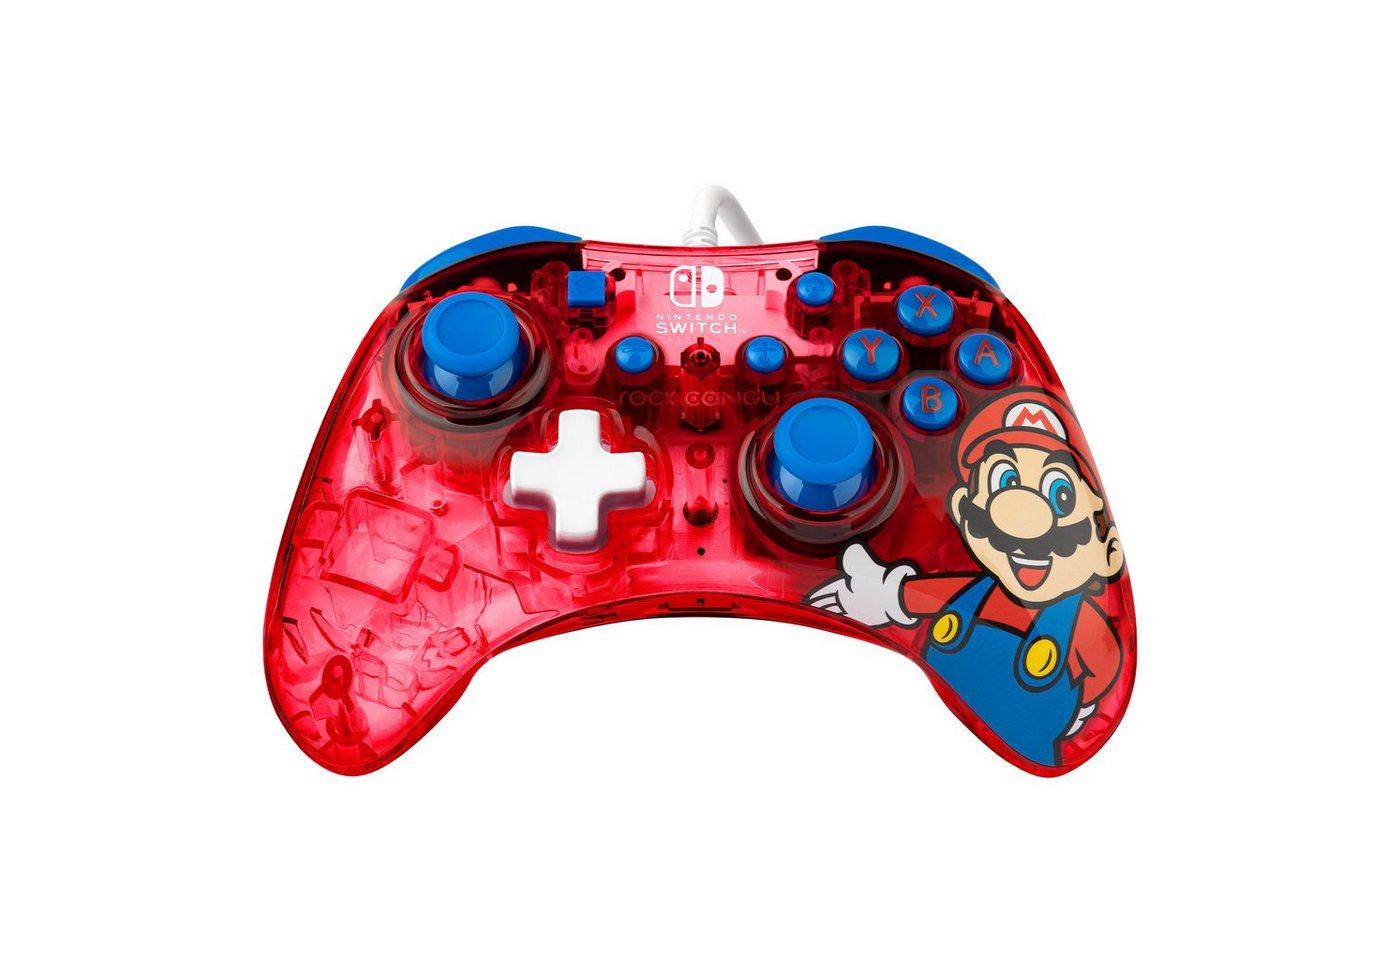 PDP - Performance Designed Products Rock Candy Mini Stormin Cherry Switch Gamepad von PDP - Performance Designed Products